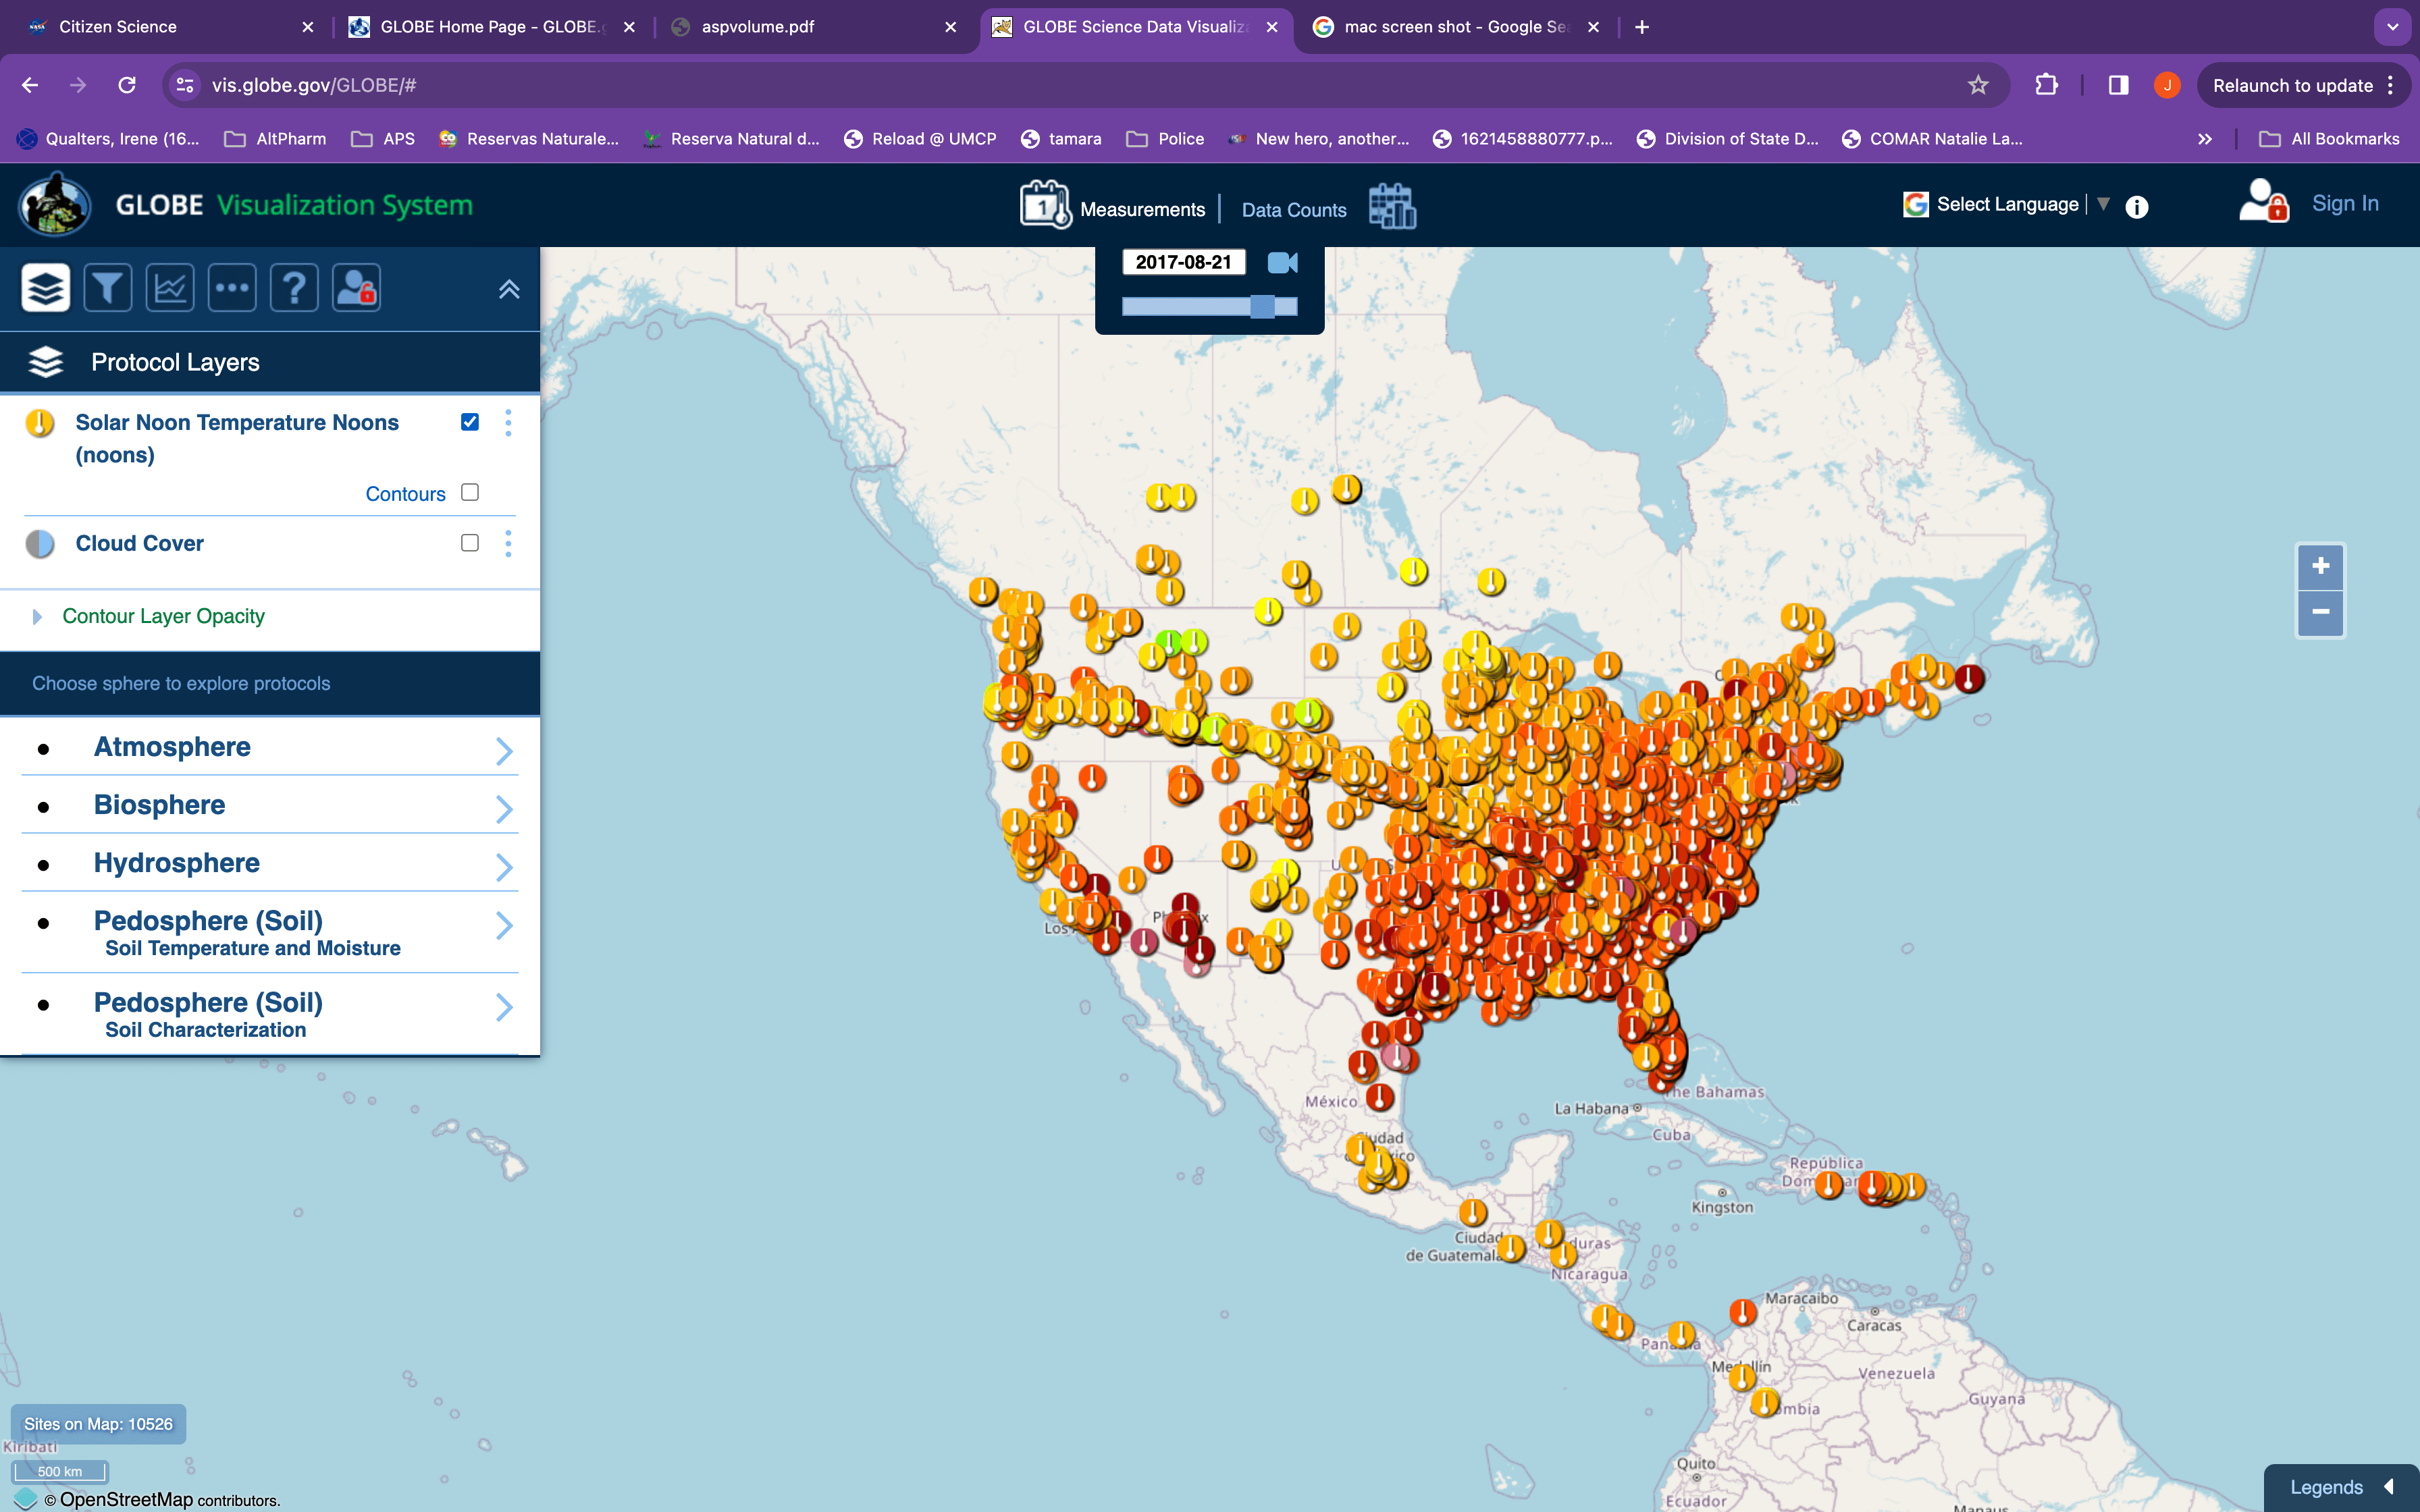 GLOBE program volunteers across North America uploaded data from locations marked on this map of data coinciding with the July 21, 2017 event. A high concentration of observers make the path of totality in the western part of the U.S. stand out.